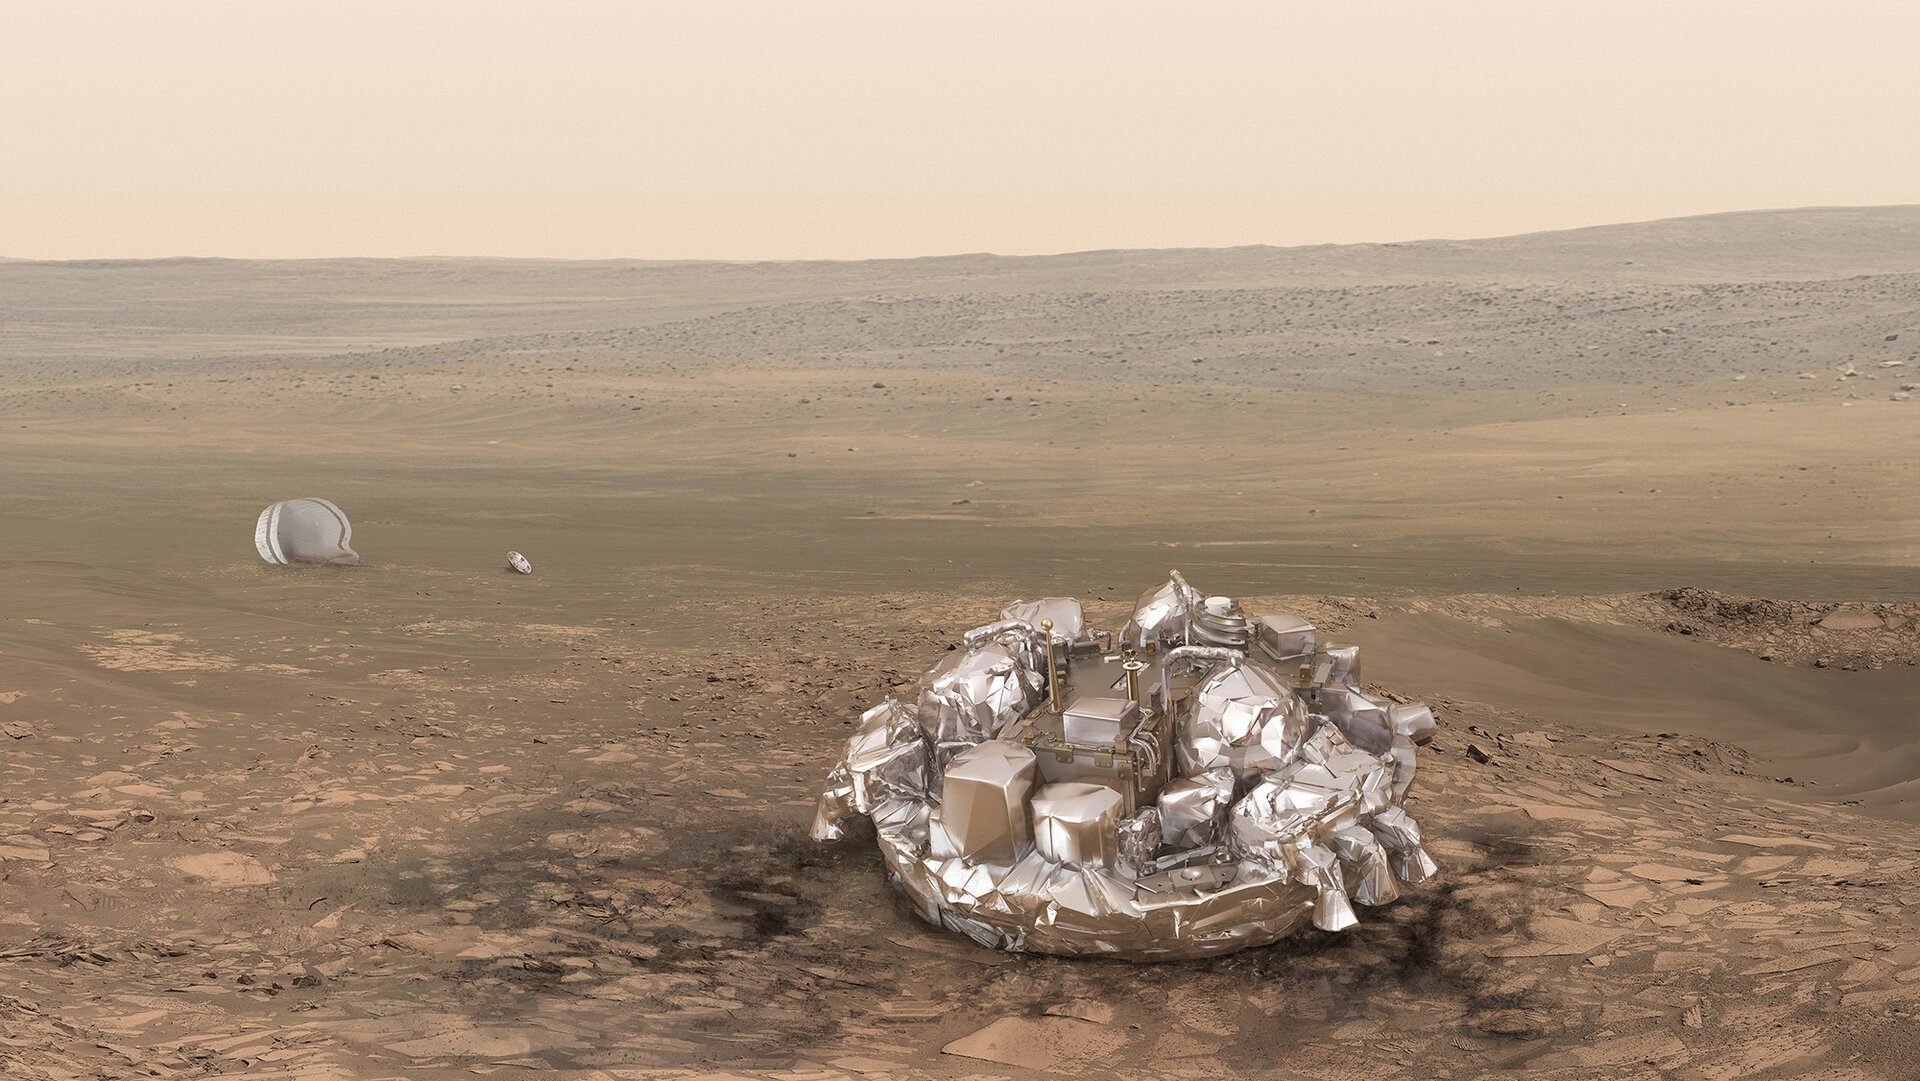 The Schiaparelli lander will look like this once it is on the surface of Mars